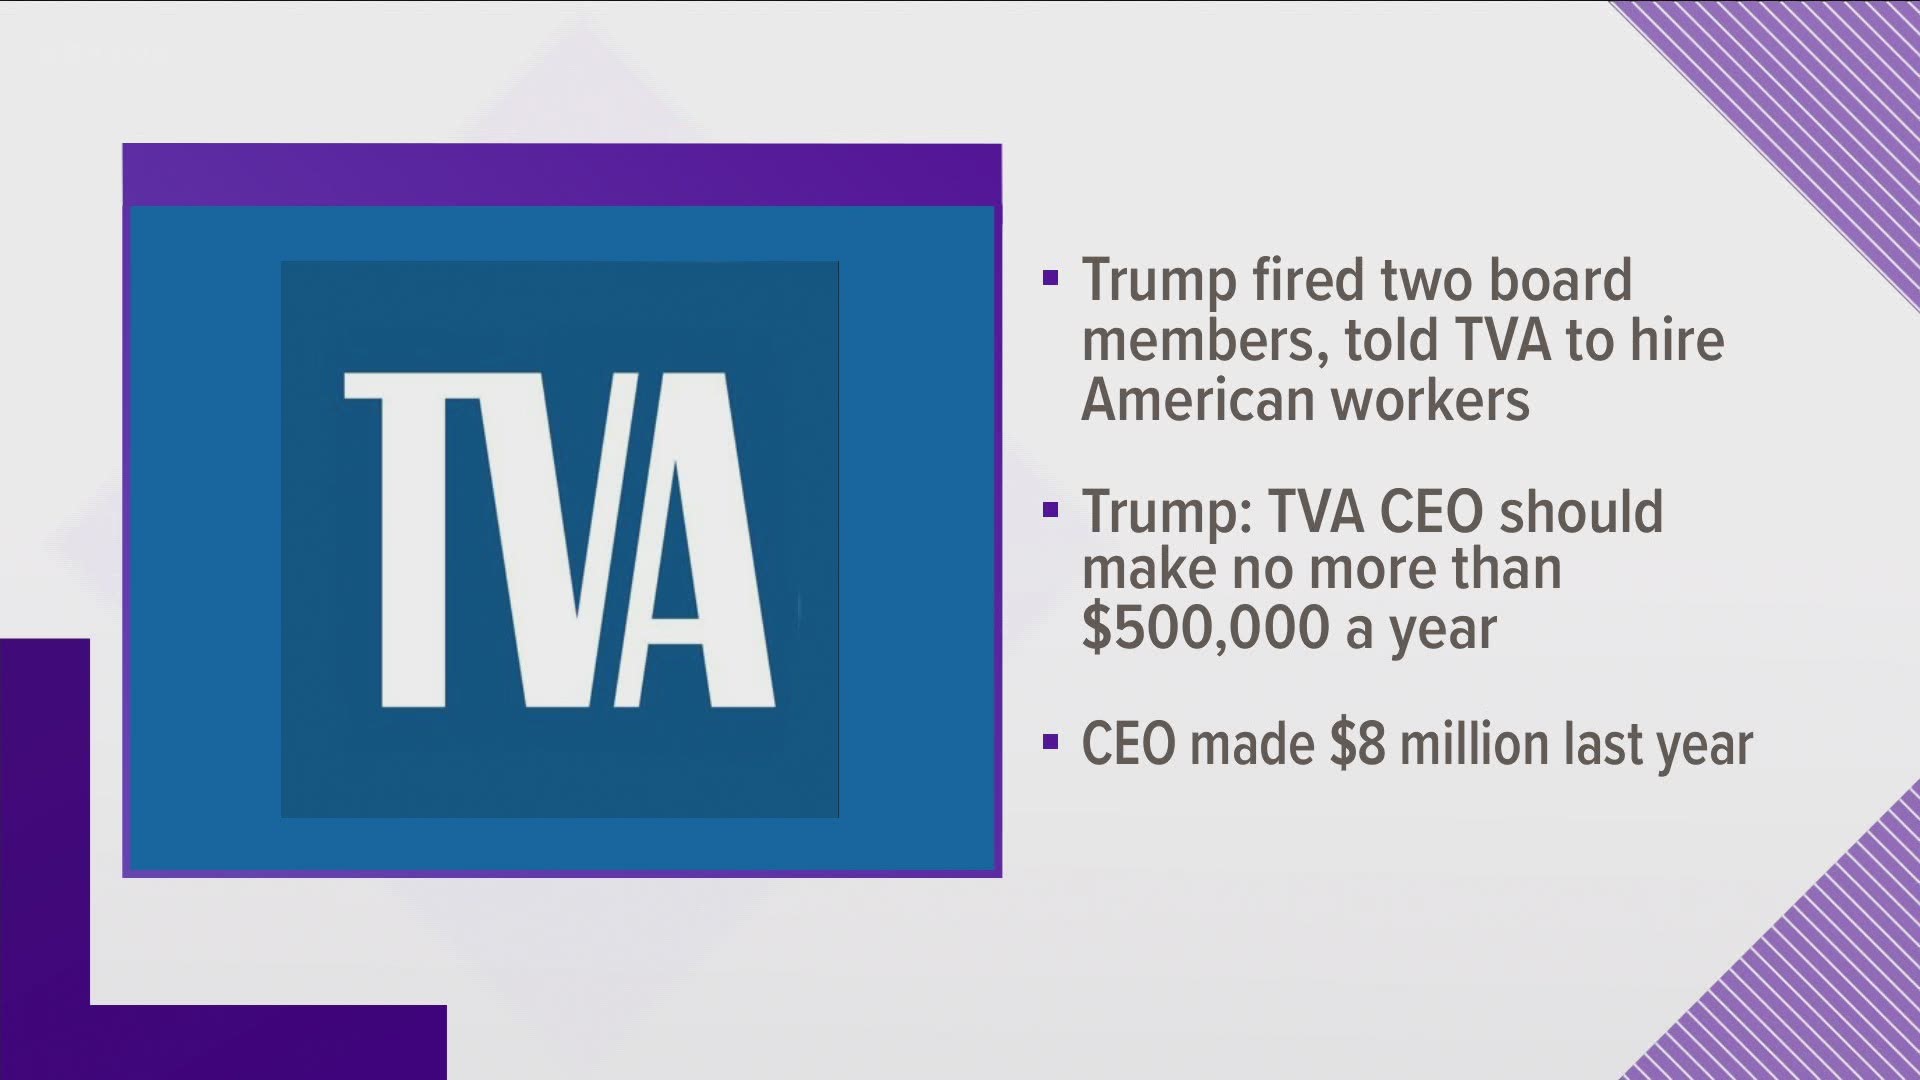 TVA said their board would thoroughly review the compensation package of CEO Jeff Lyash after comments from President Donald Trump.